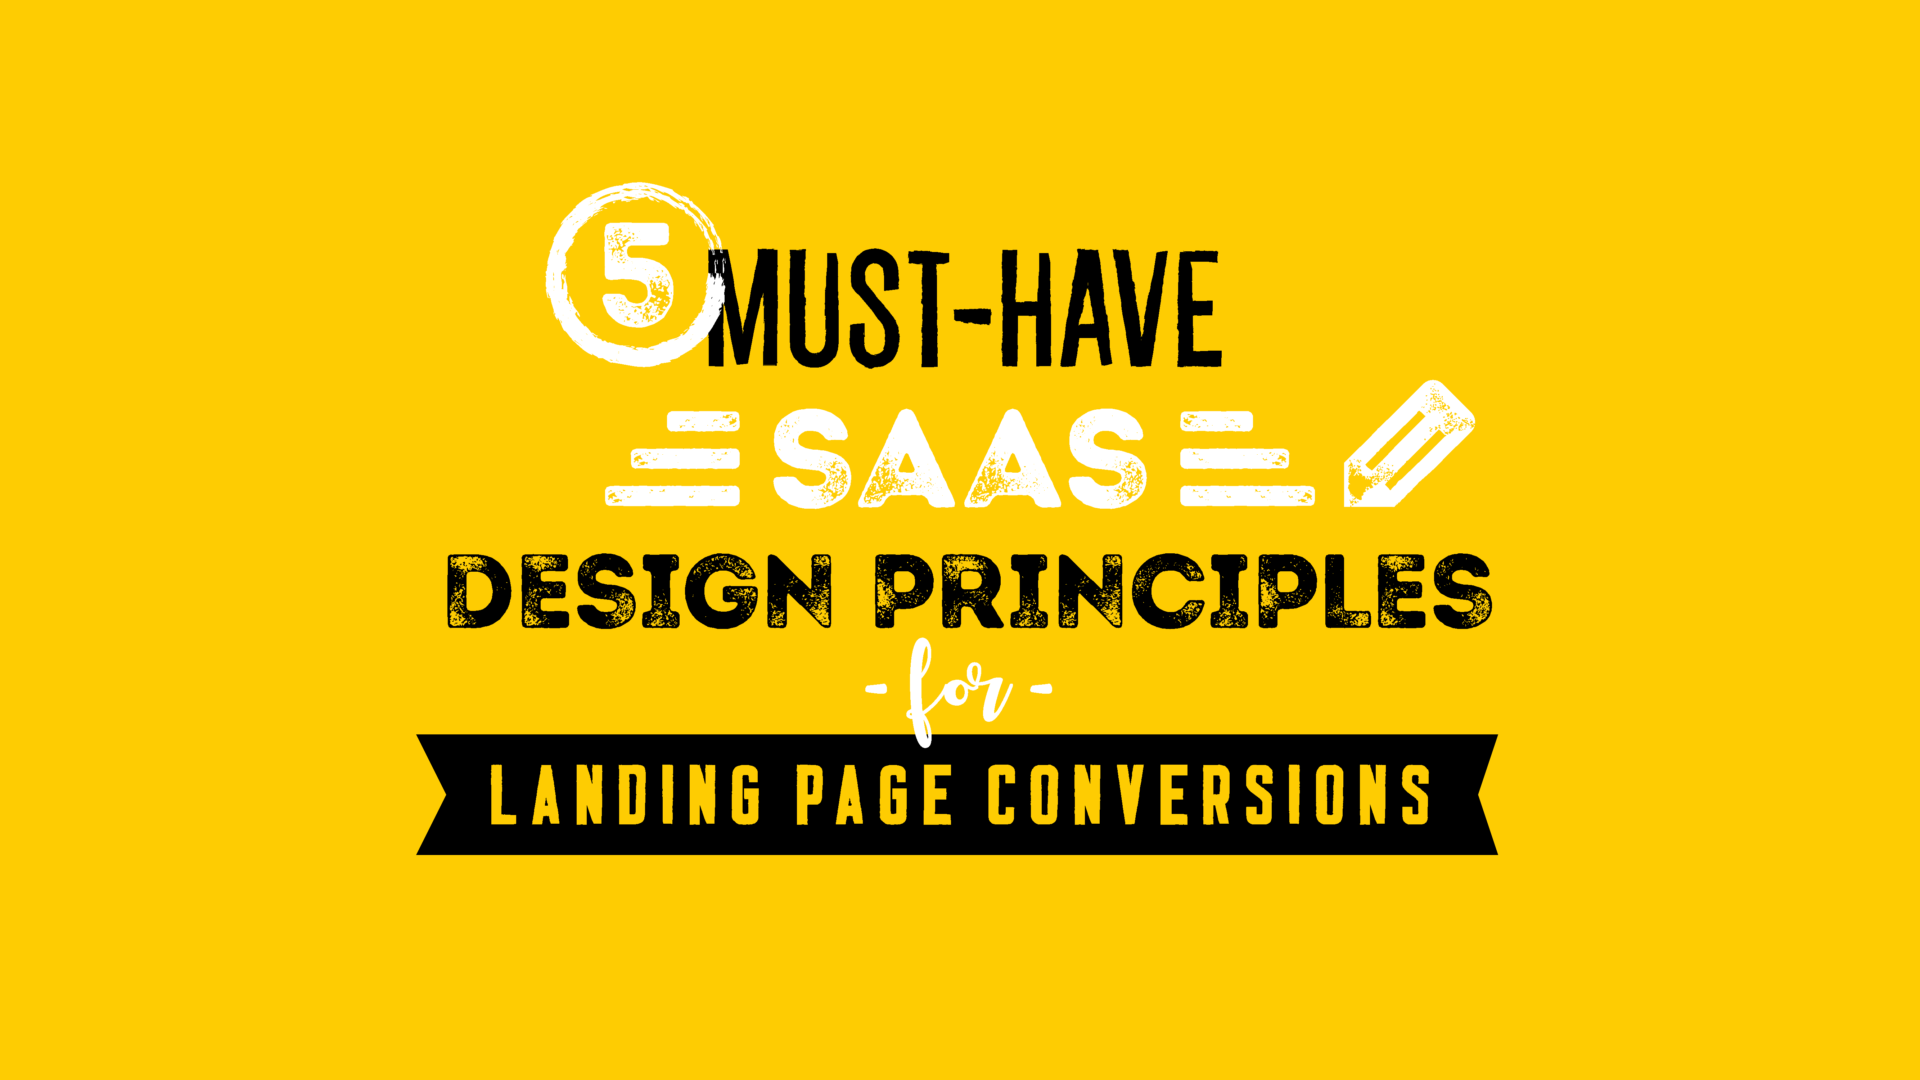 5 Must-Have SaaS Design Principles for Landing Page Conversions